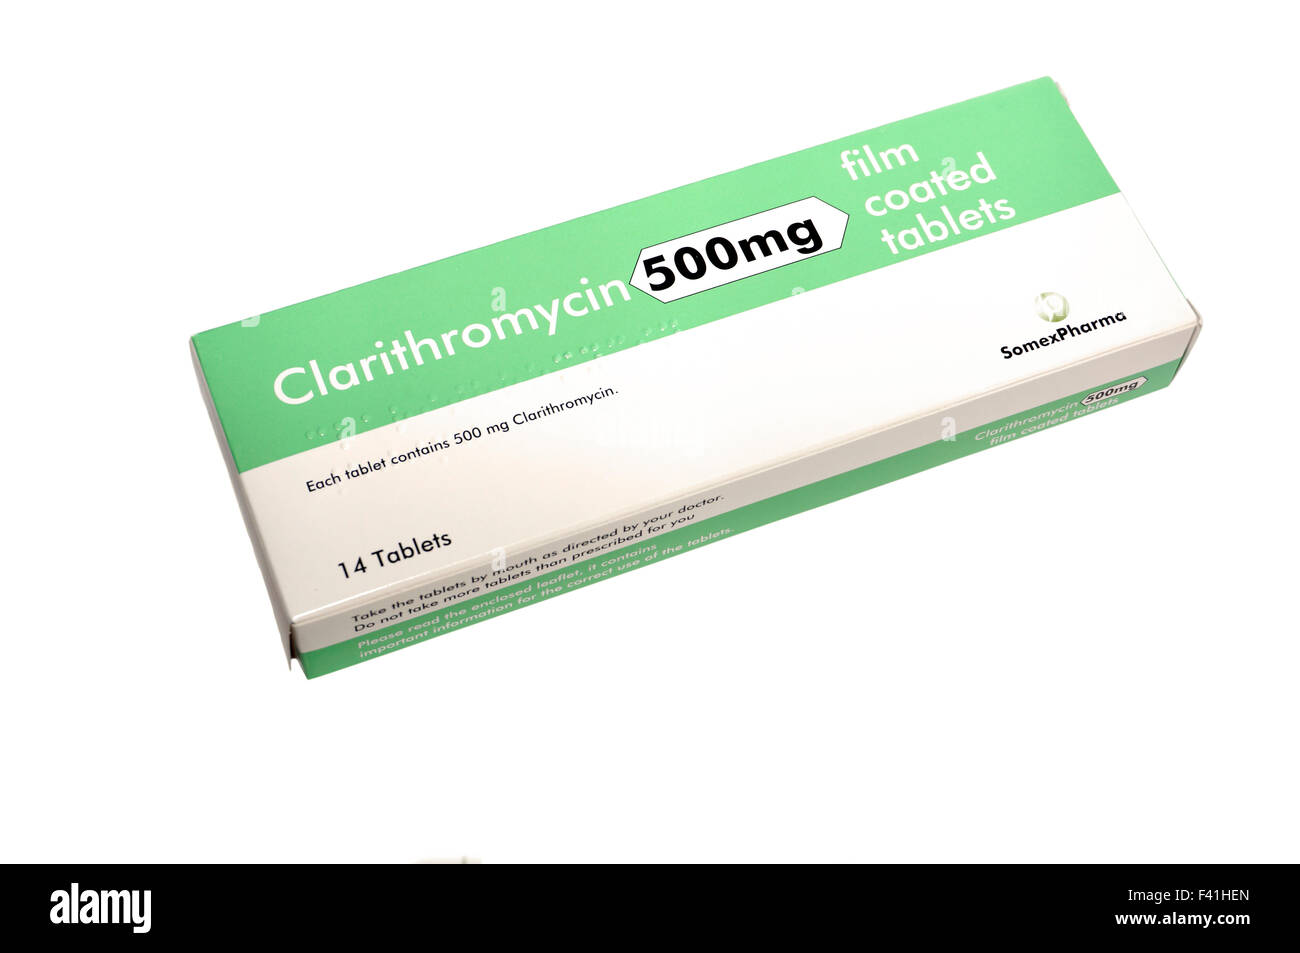 Clarithromycin tablets antibiotics belonging to a group of medicines known as macrolides Stock Photo